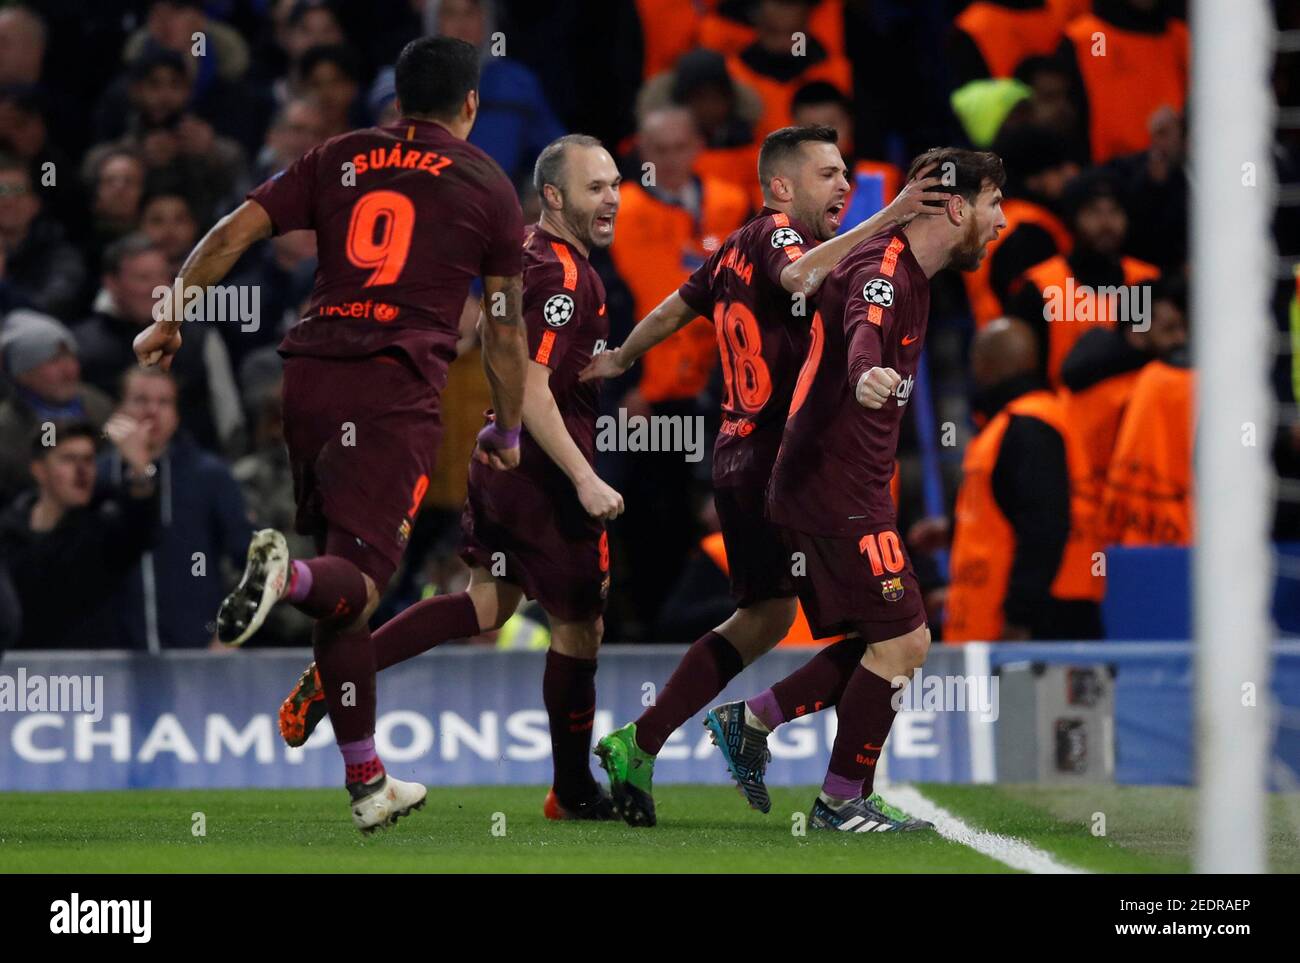 Soccer Football - Champions League Round of 16 First Leg - Chelsea vs FC Barcelona - Stamford Bridge, London, Britain - February 20, 2018   Barcelona’s Lionel Messi celebrates scoring their first goal with Jordi Alba, Andres Iniesta and Luis Suarez    REUTERS/Eddie Keogh Stock Photo